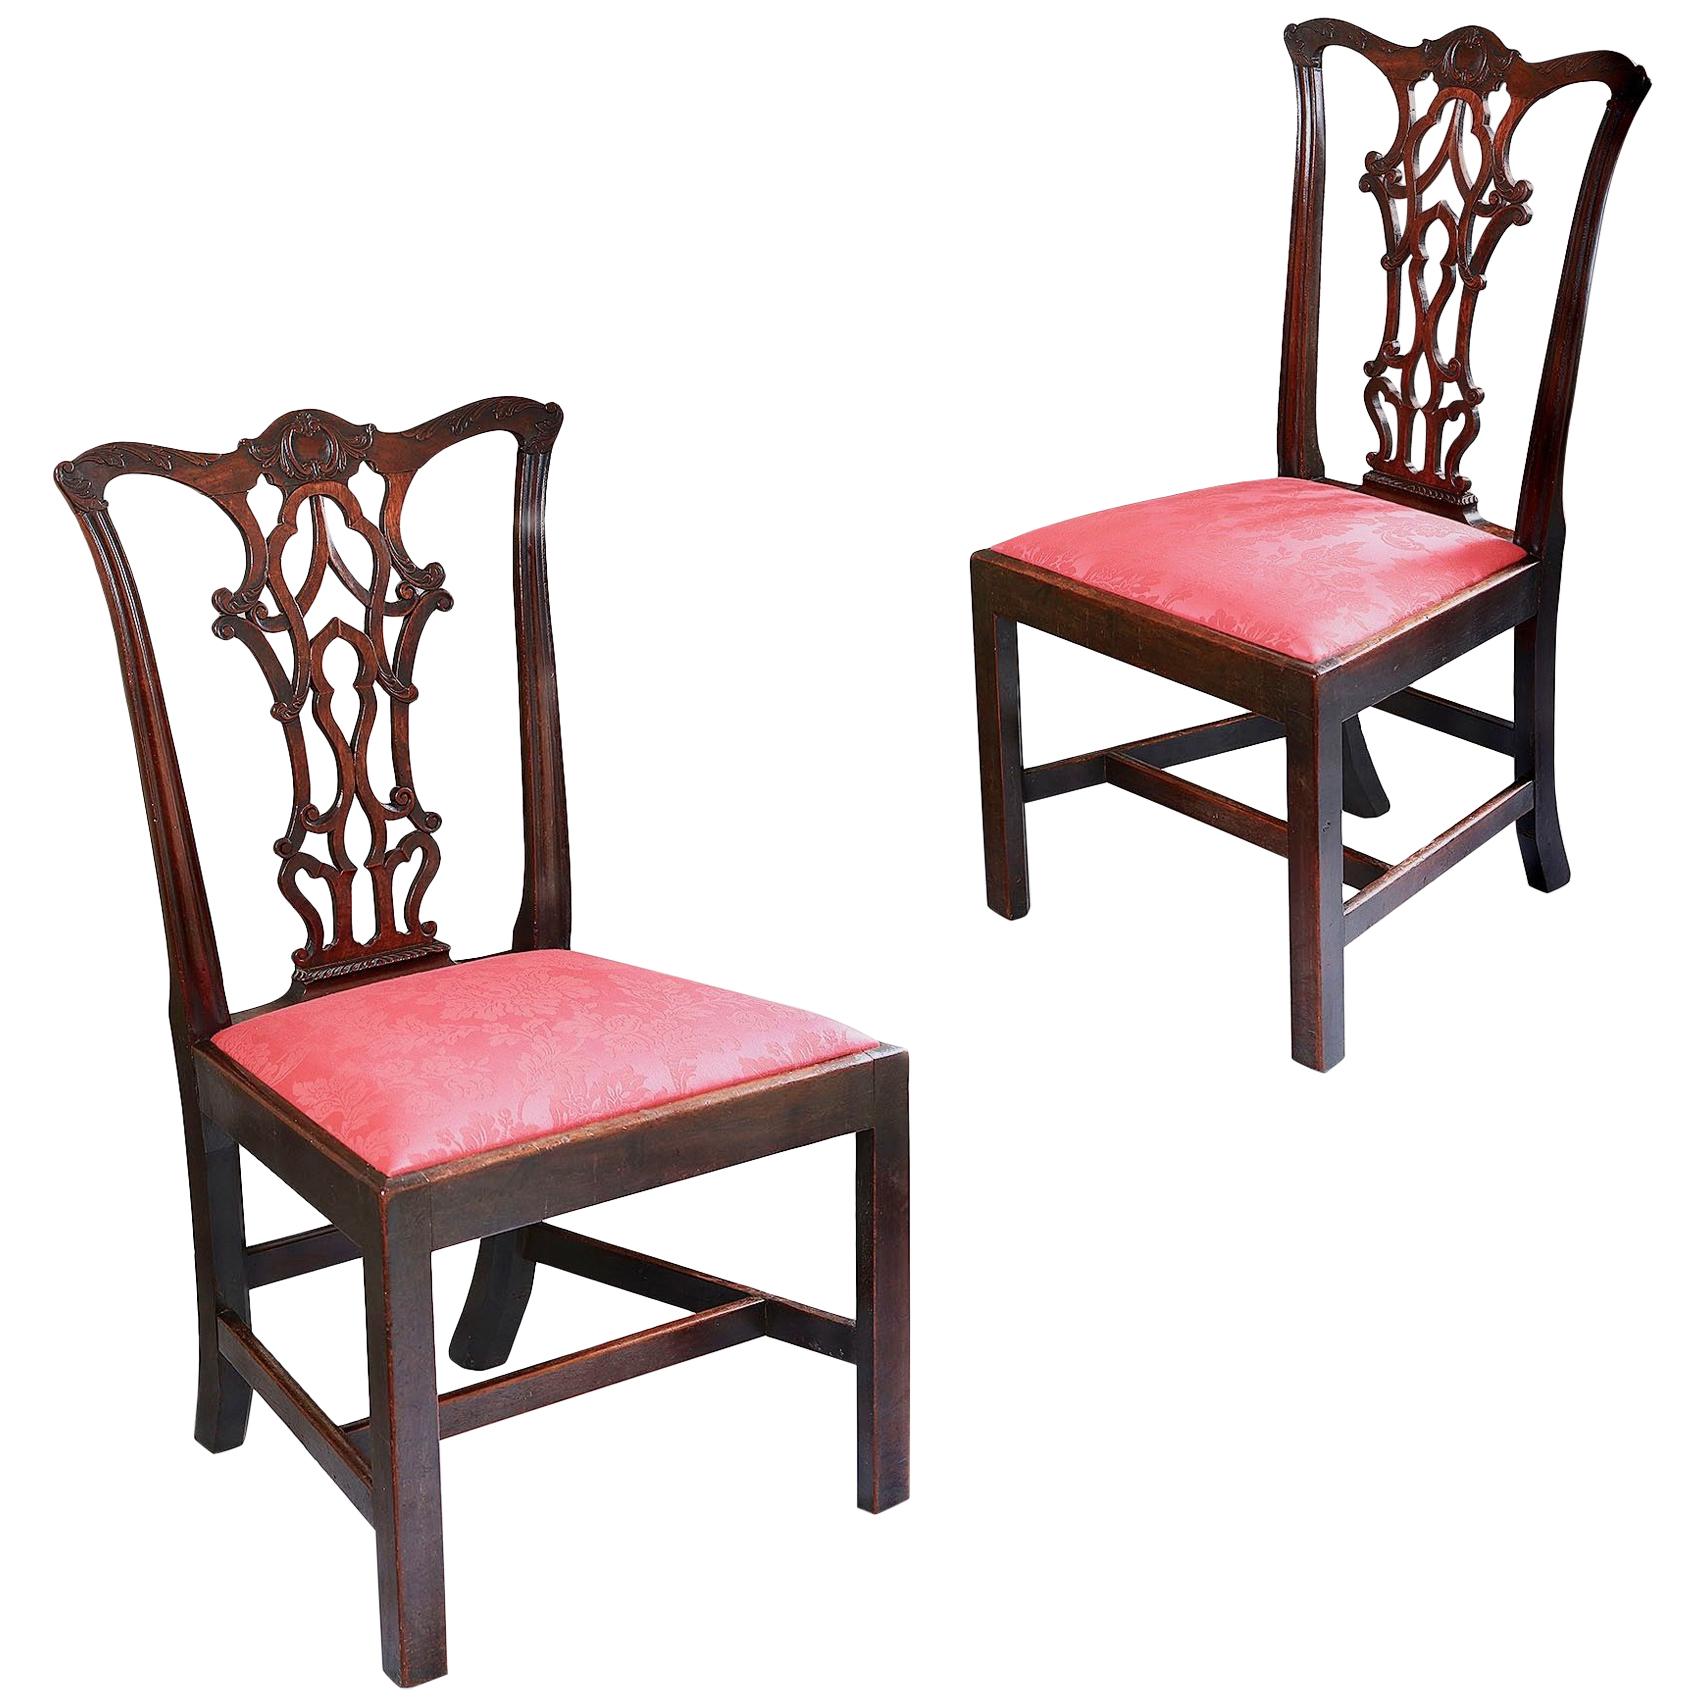 Set of 18th century Chippendale chairs